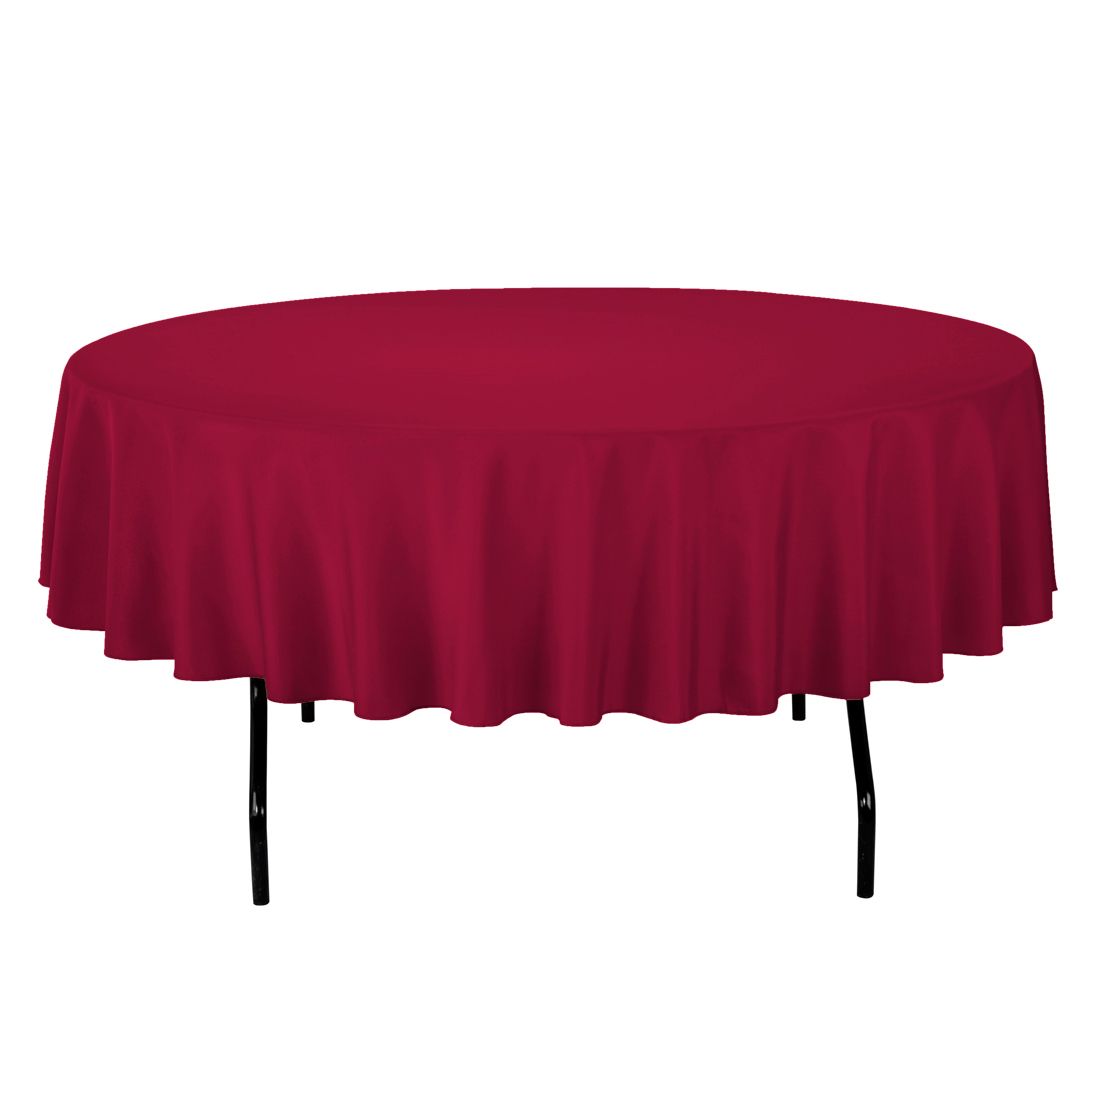 90 In. Round Spun Polyester Tablecloth Factory